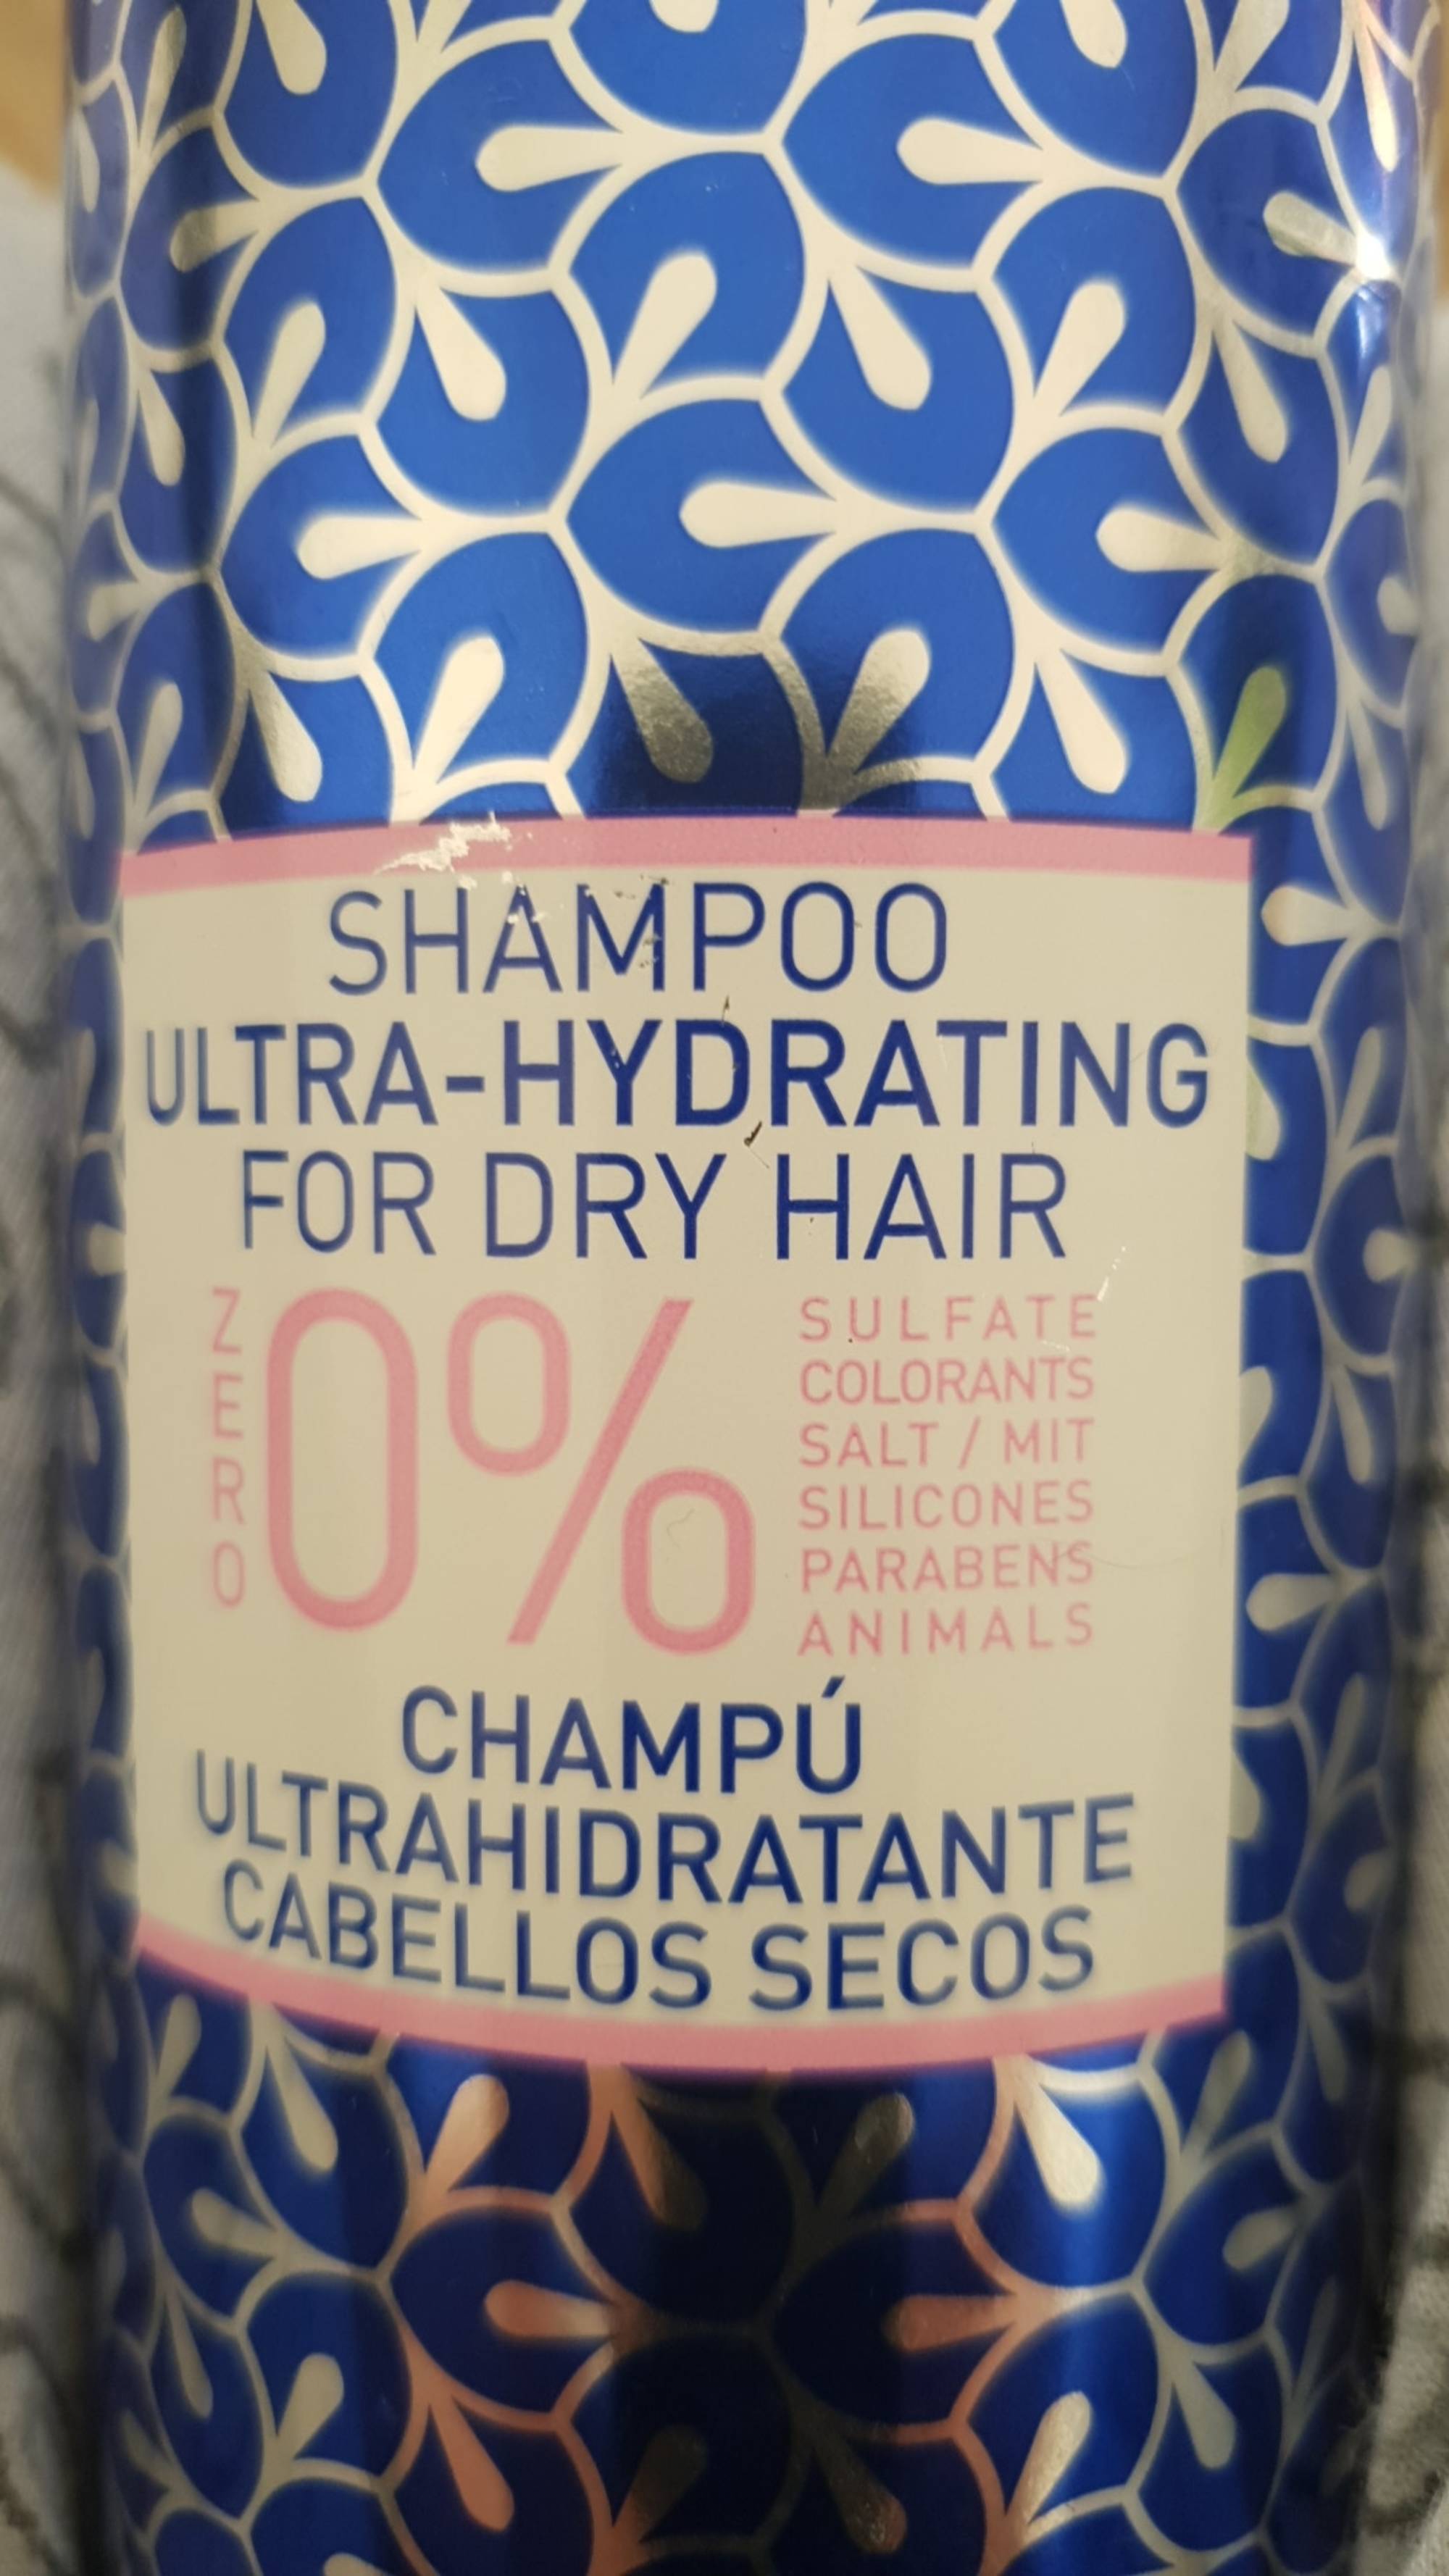 VALQUER - Shampoo ultra-hydrating for dry hair